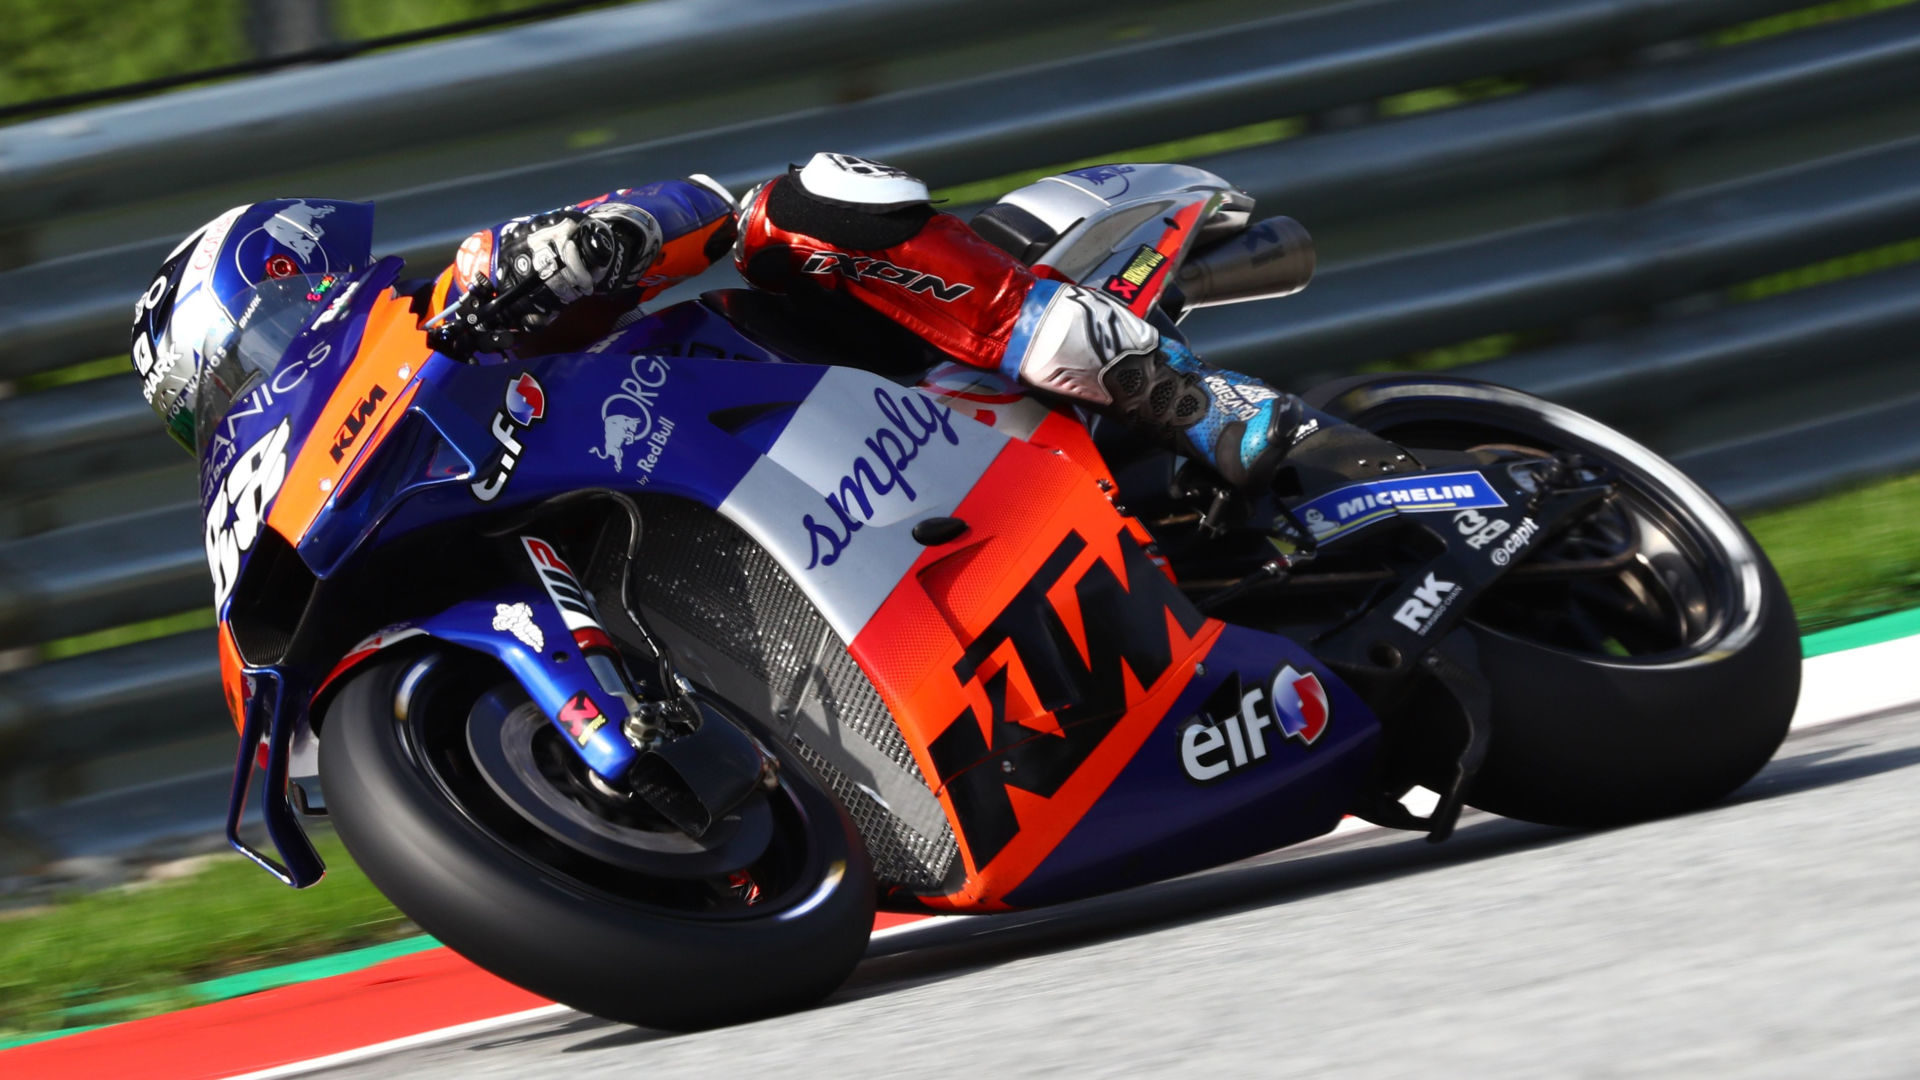 Motogp Oliveira Expects To Continue Fighting For Top Positions Roadracing World Magazine Motorcycle Riding Racing Tech News